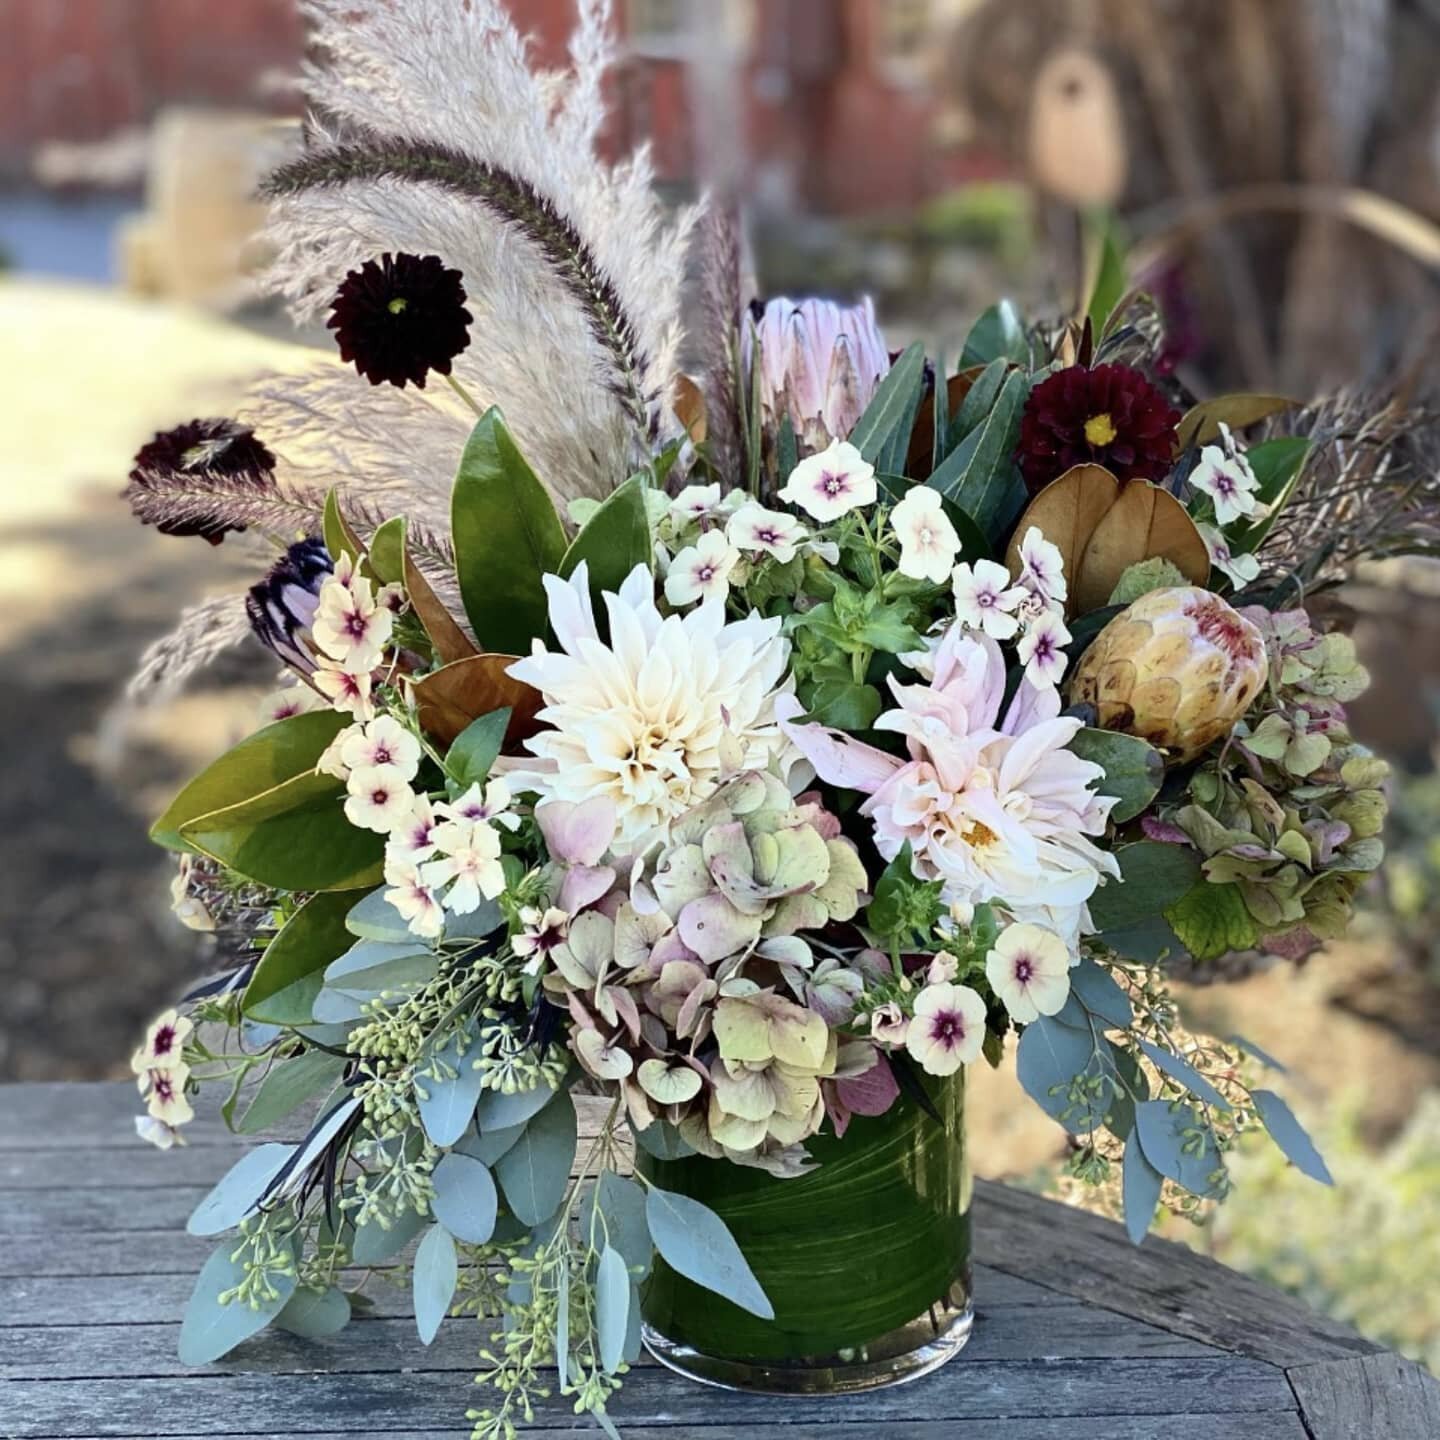 Isn't this fantastically fall? 😍 We're in love with these autumnal textures and palette! #fallflowers  #weddingseason2020 #ceremonyflowers #floraldesign #eventdecor #weddingflowers #weddingflorist #sonomaweddings #napaweddings #winecountry  #winecou